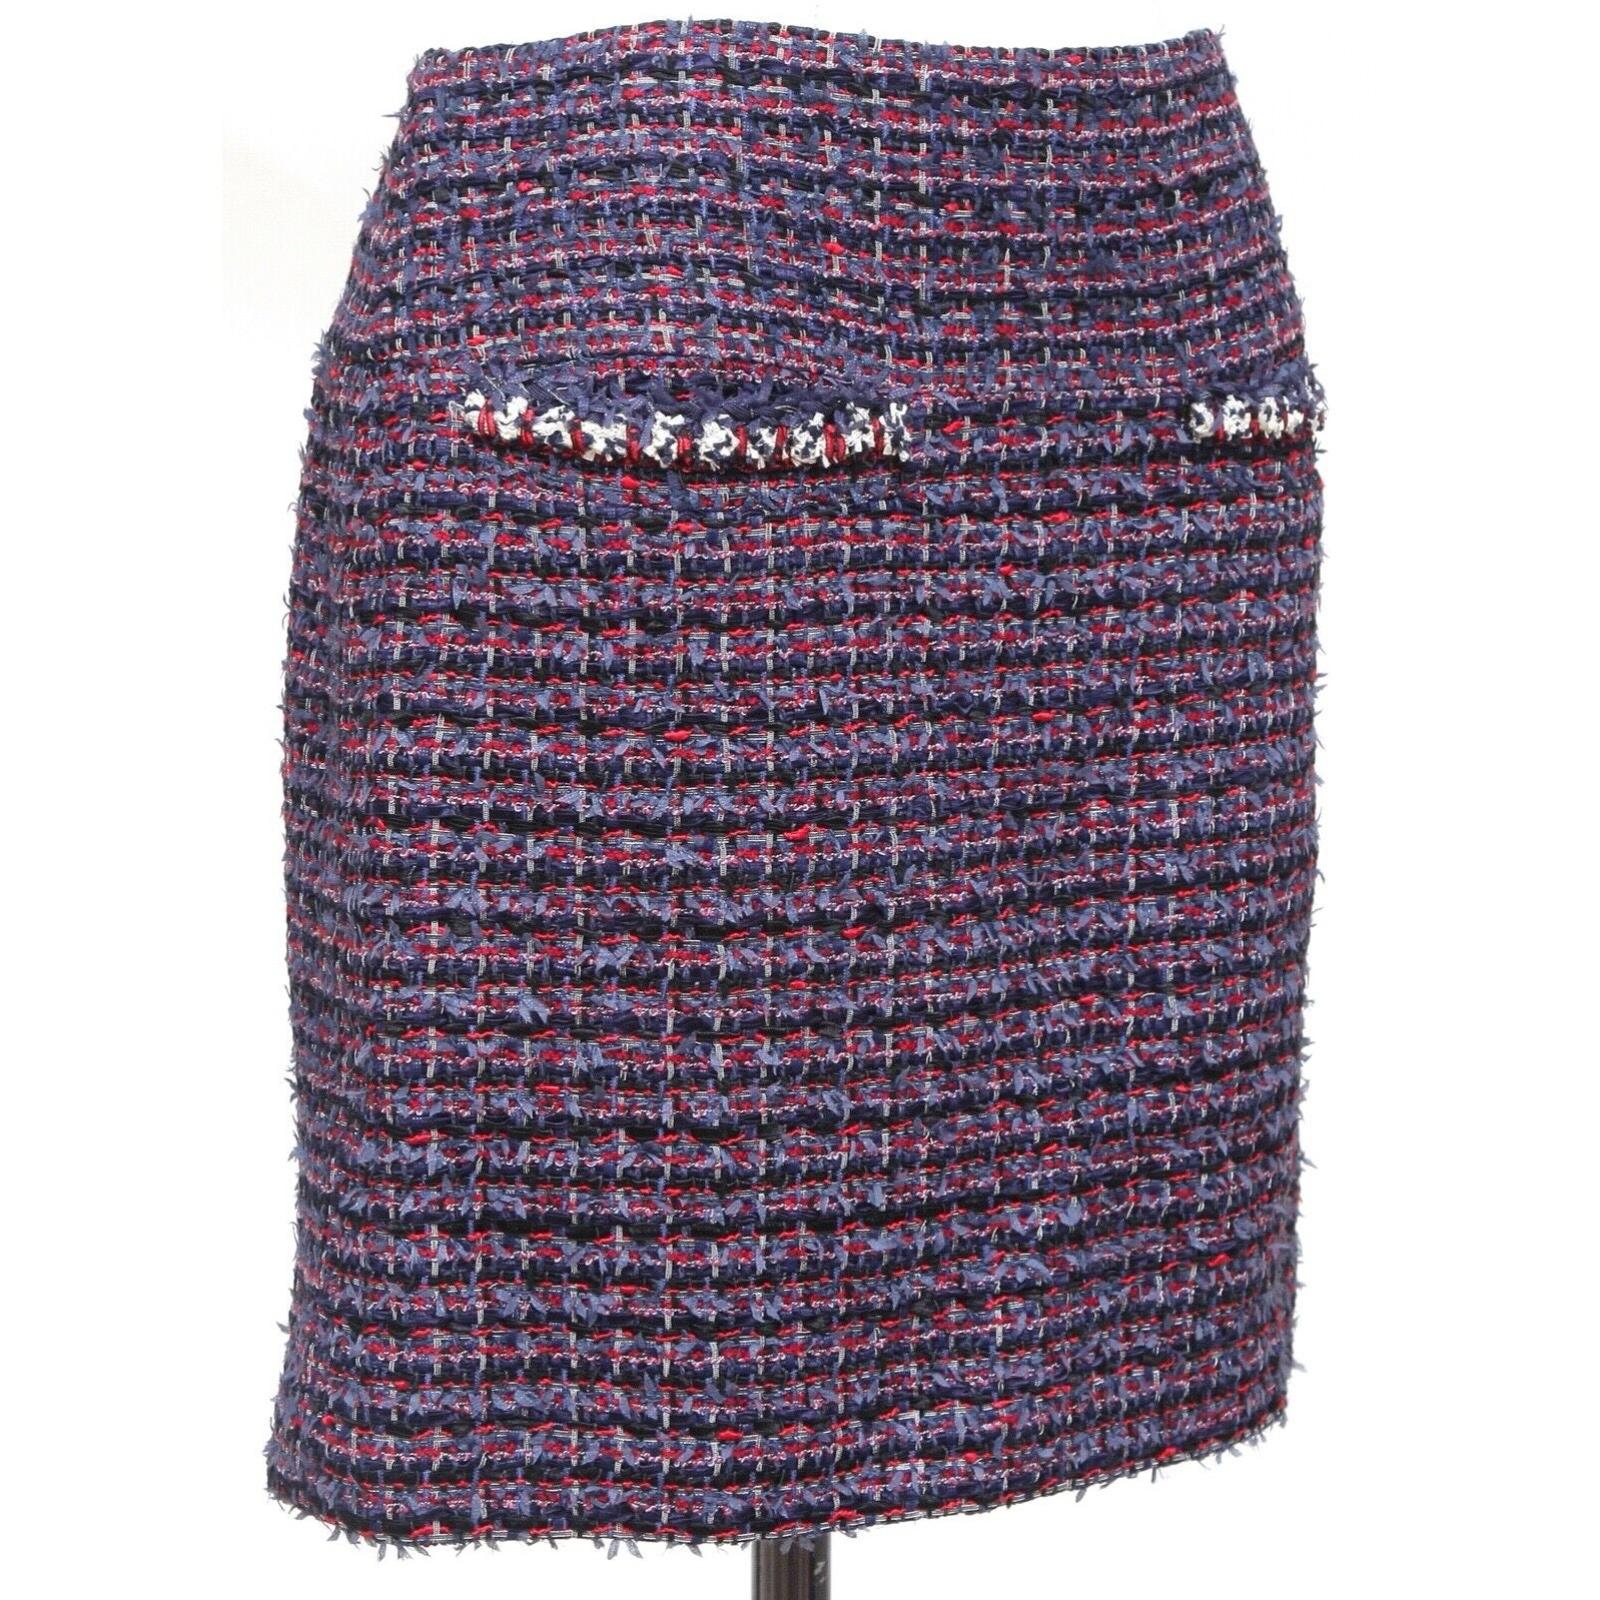 GUARANTEED AUTHENTIC CHANEL CRUISE 2013 TWEED ABOVE THE KNEE SKIRT

Details:
- Stunning fantasy tweed skirt in blue, red and black.
- Dual front pockets.
- Gold-tone metal CC plaque found at left hip.
- Rests above the knee.
- Back zipper with